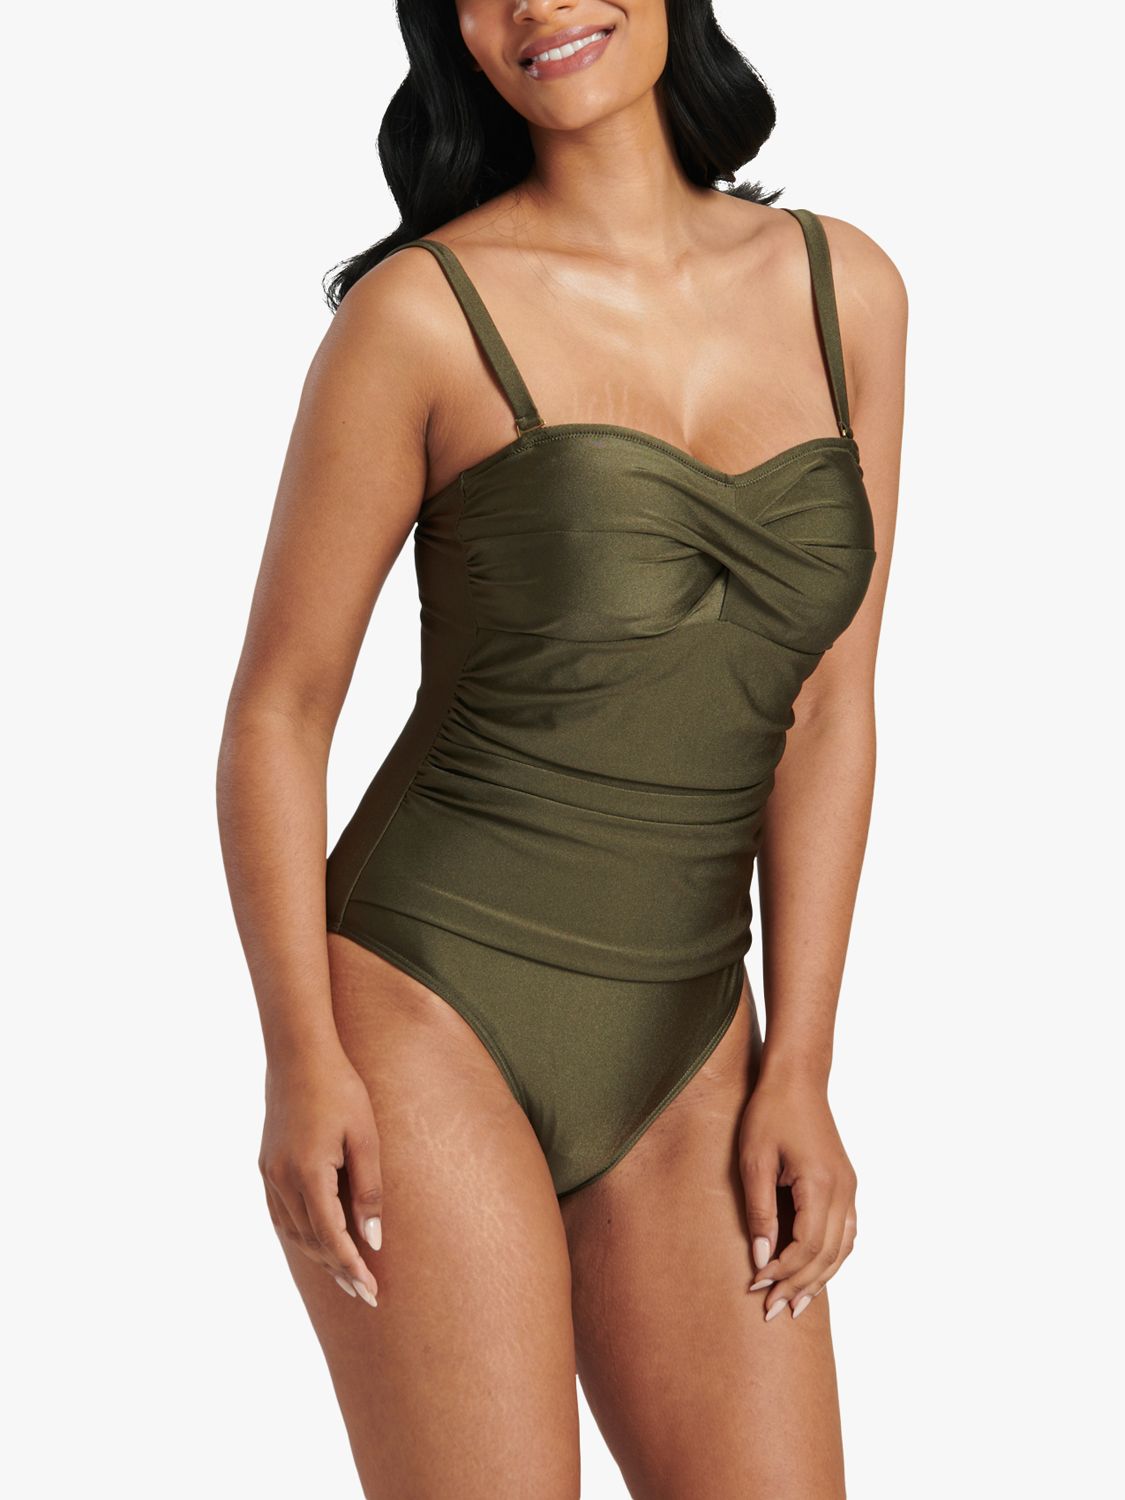 South Beach Bandeau Tummy Control Swimsuit, Olive, 8